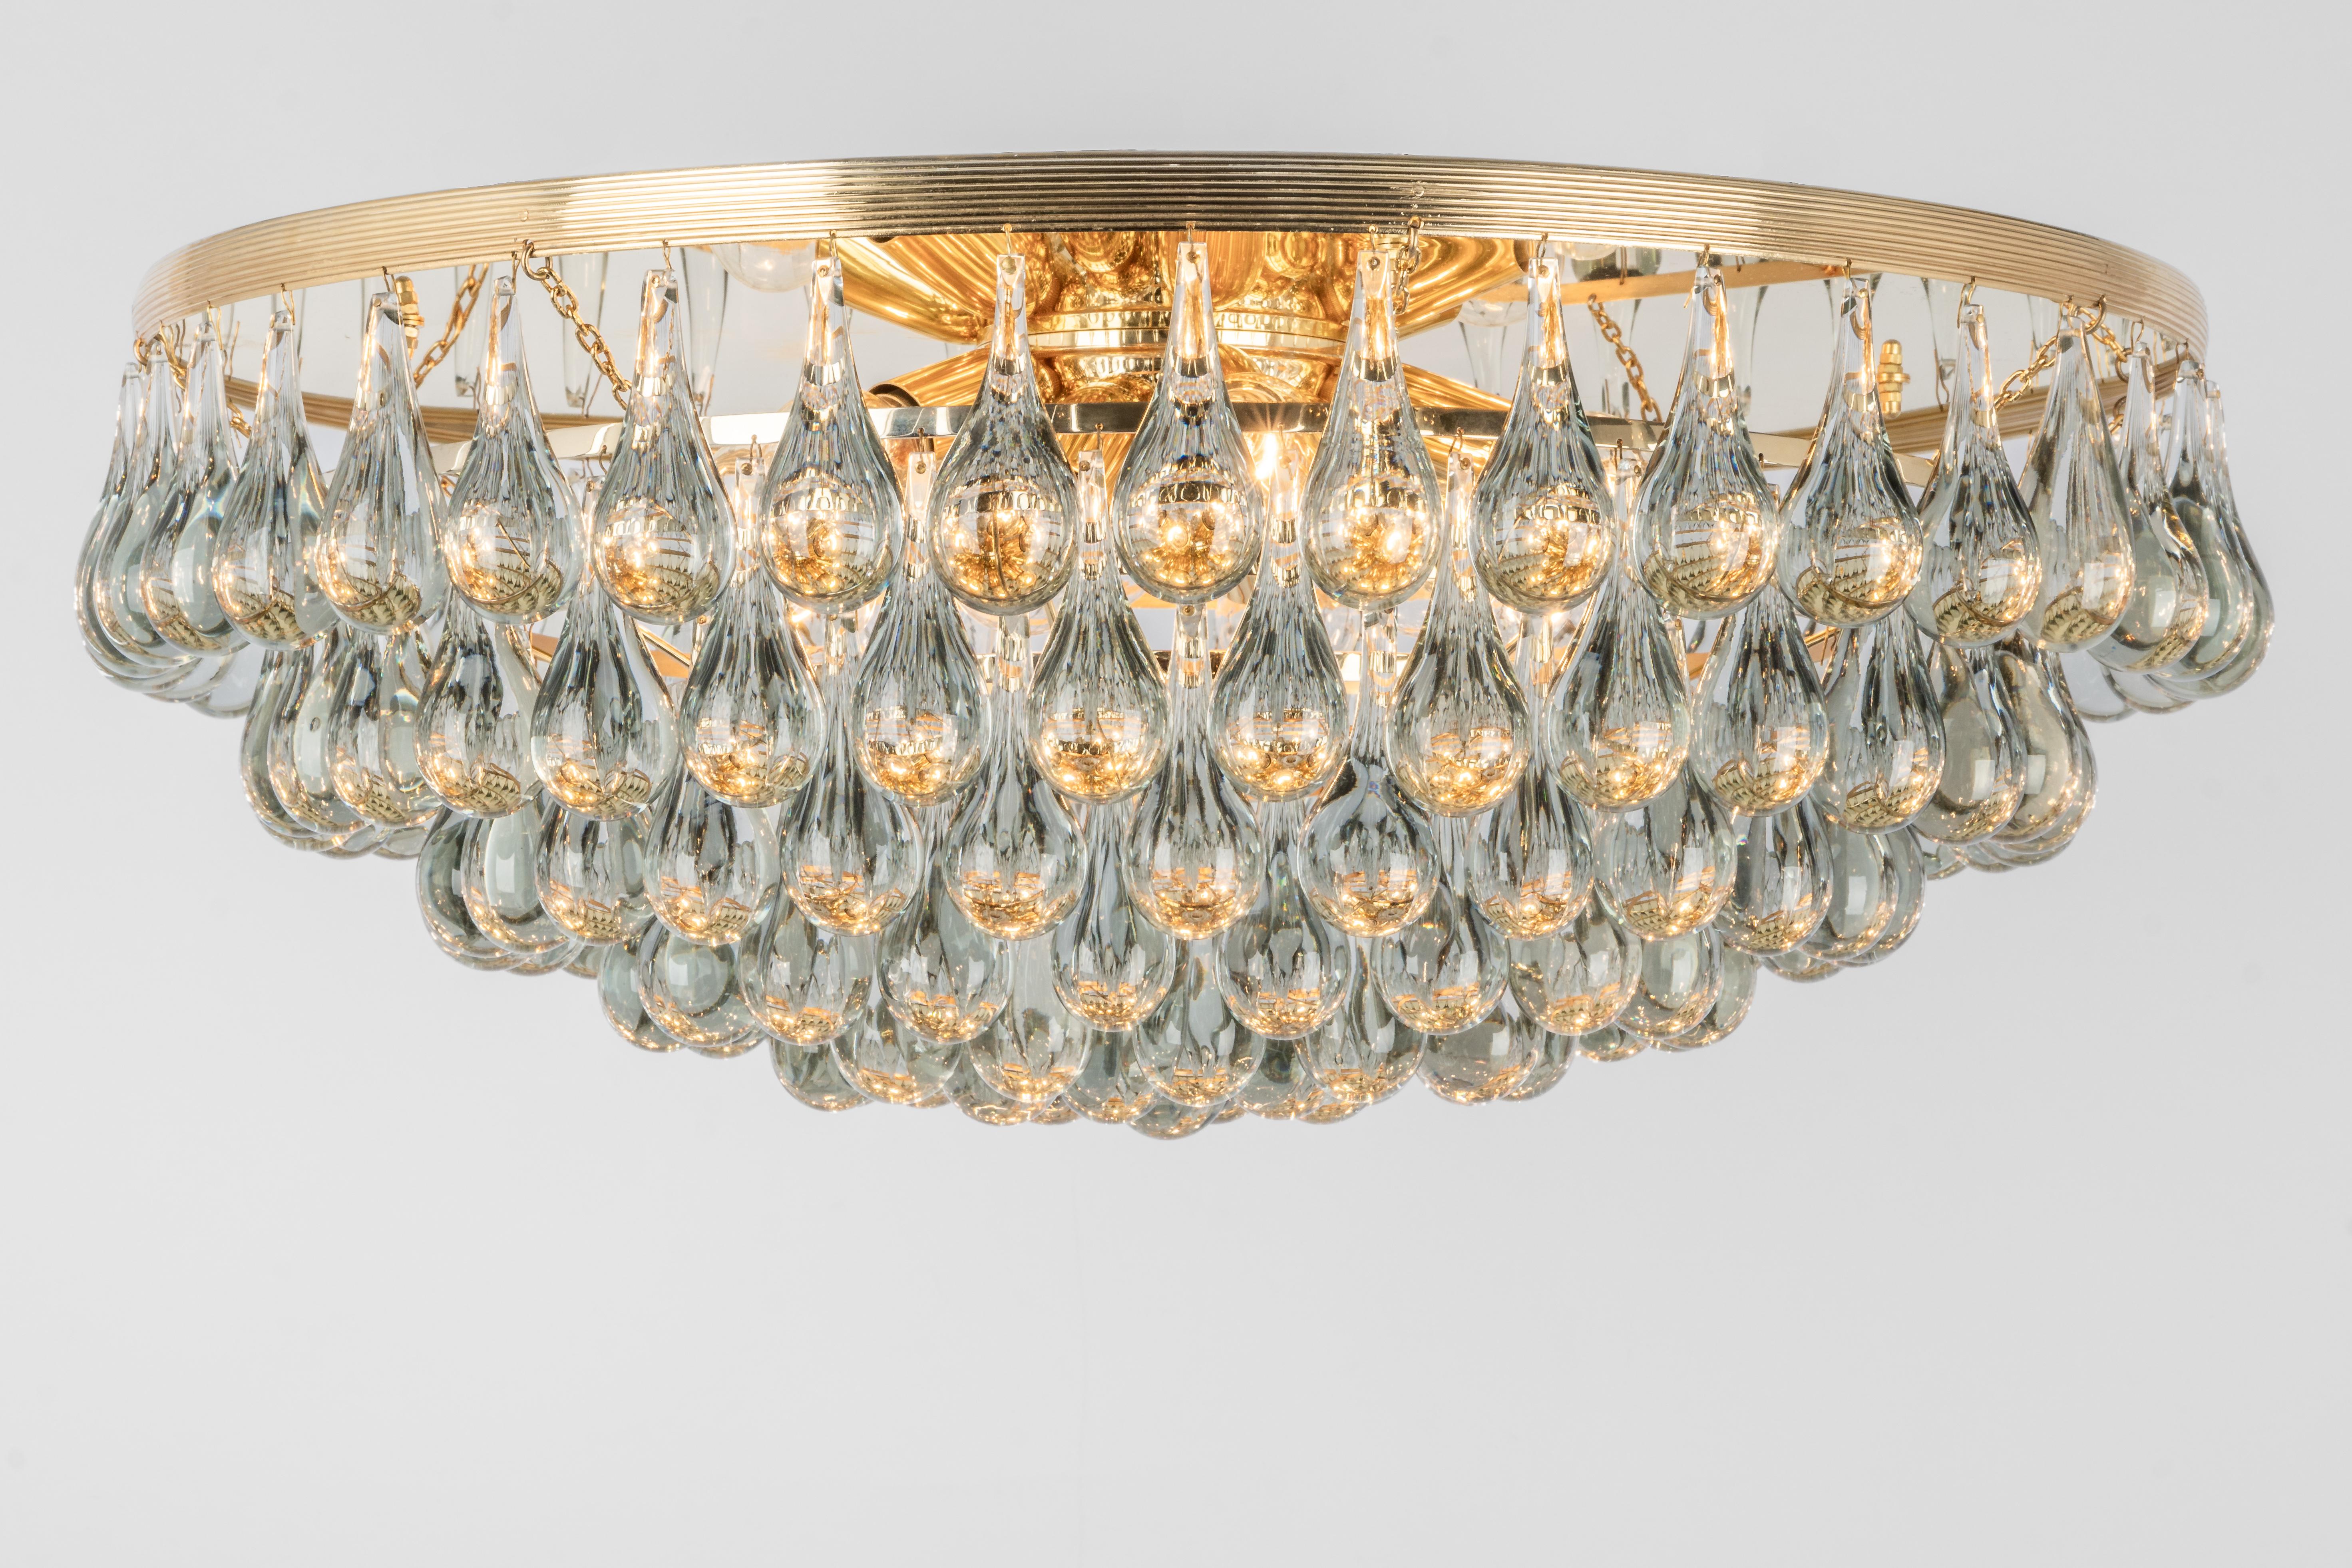 A stunning huge chandelier by Christoph Palme, Germany, was manufactured in the 1970s. It’s composed of Murano teardrop glass pieces on a metal /brass frame.
High quality of materials.
3 items are available.
Sockets: It needs 12 x E14 base bulbs to